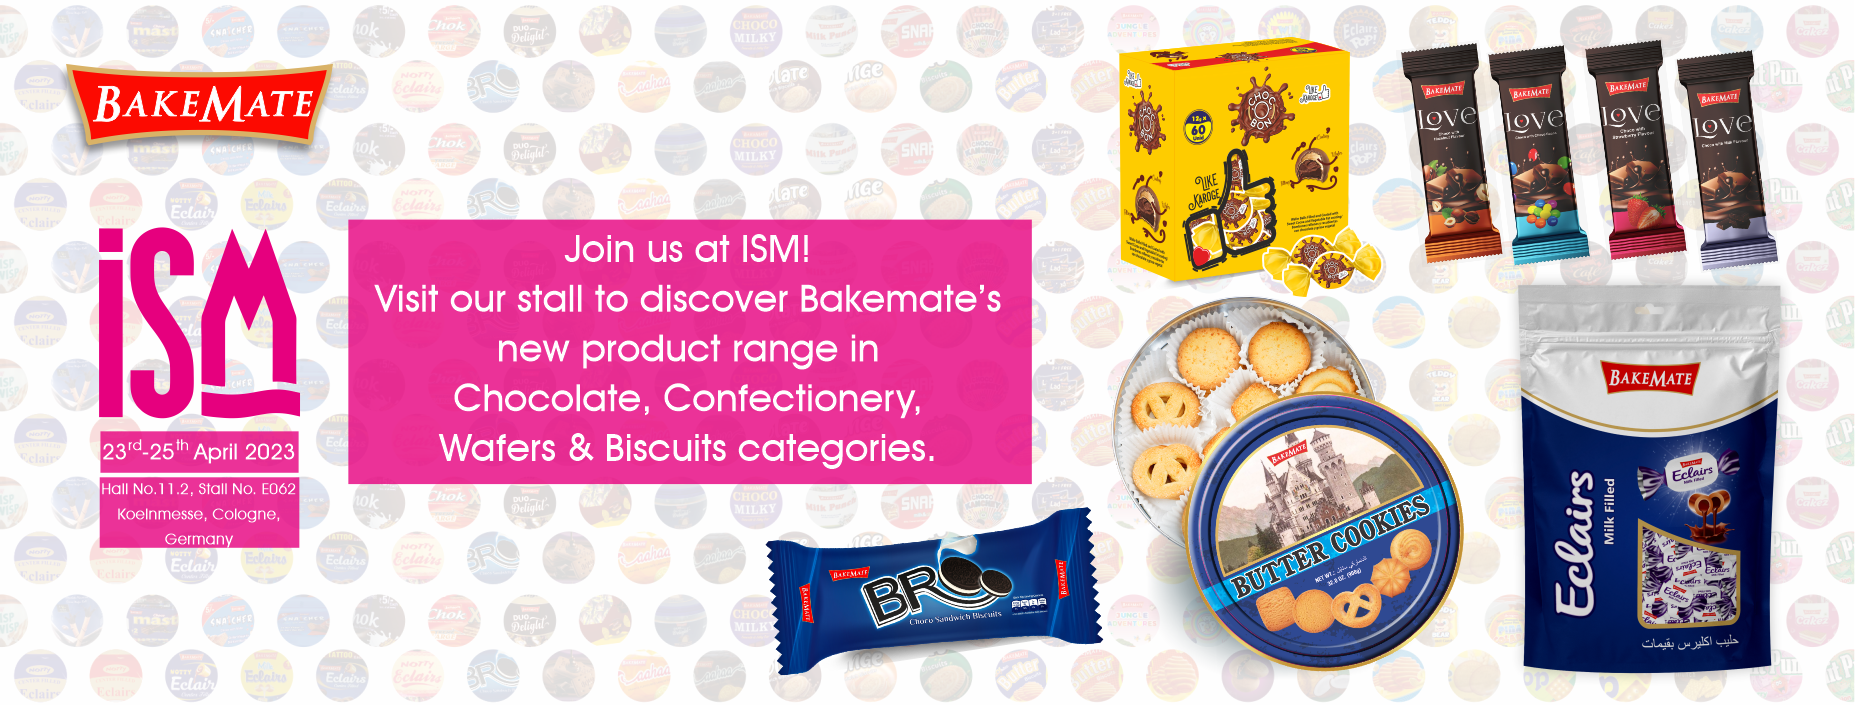 ISM Cologne 2023 - The World's Largest Trade Fair for Sweets and Biscuits, from 23rd to 25th April in Cologne, Germany HALL NO. 11.2, stall No. E-062 Date: 23rd to 25th April, 2023 Koelnmesse, Cologne.